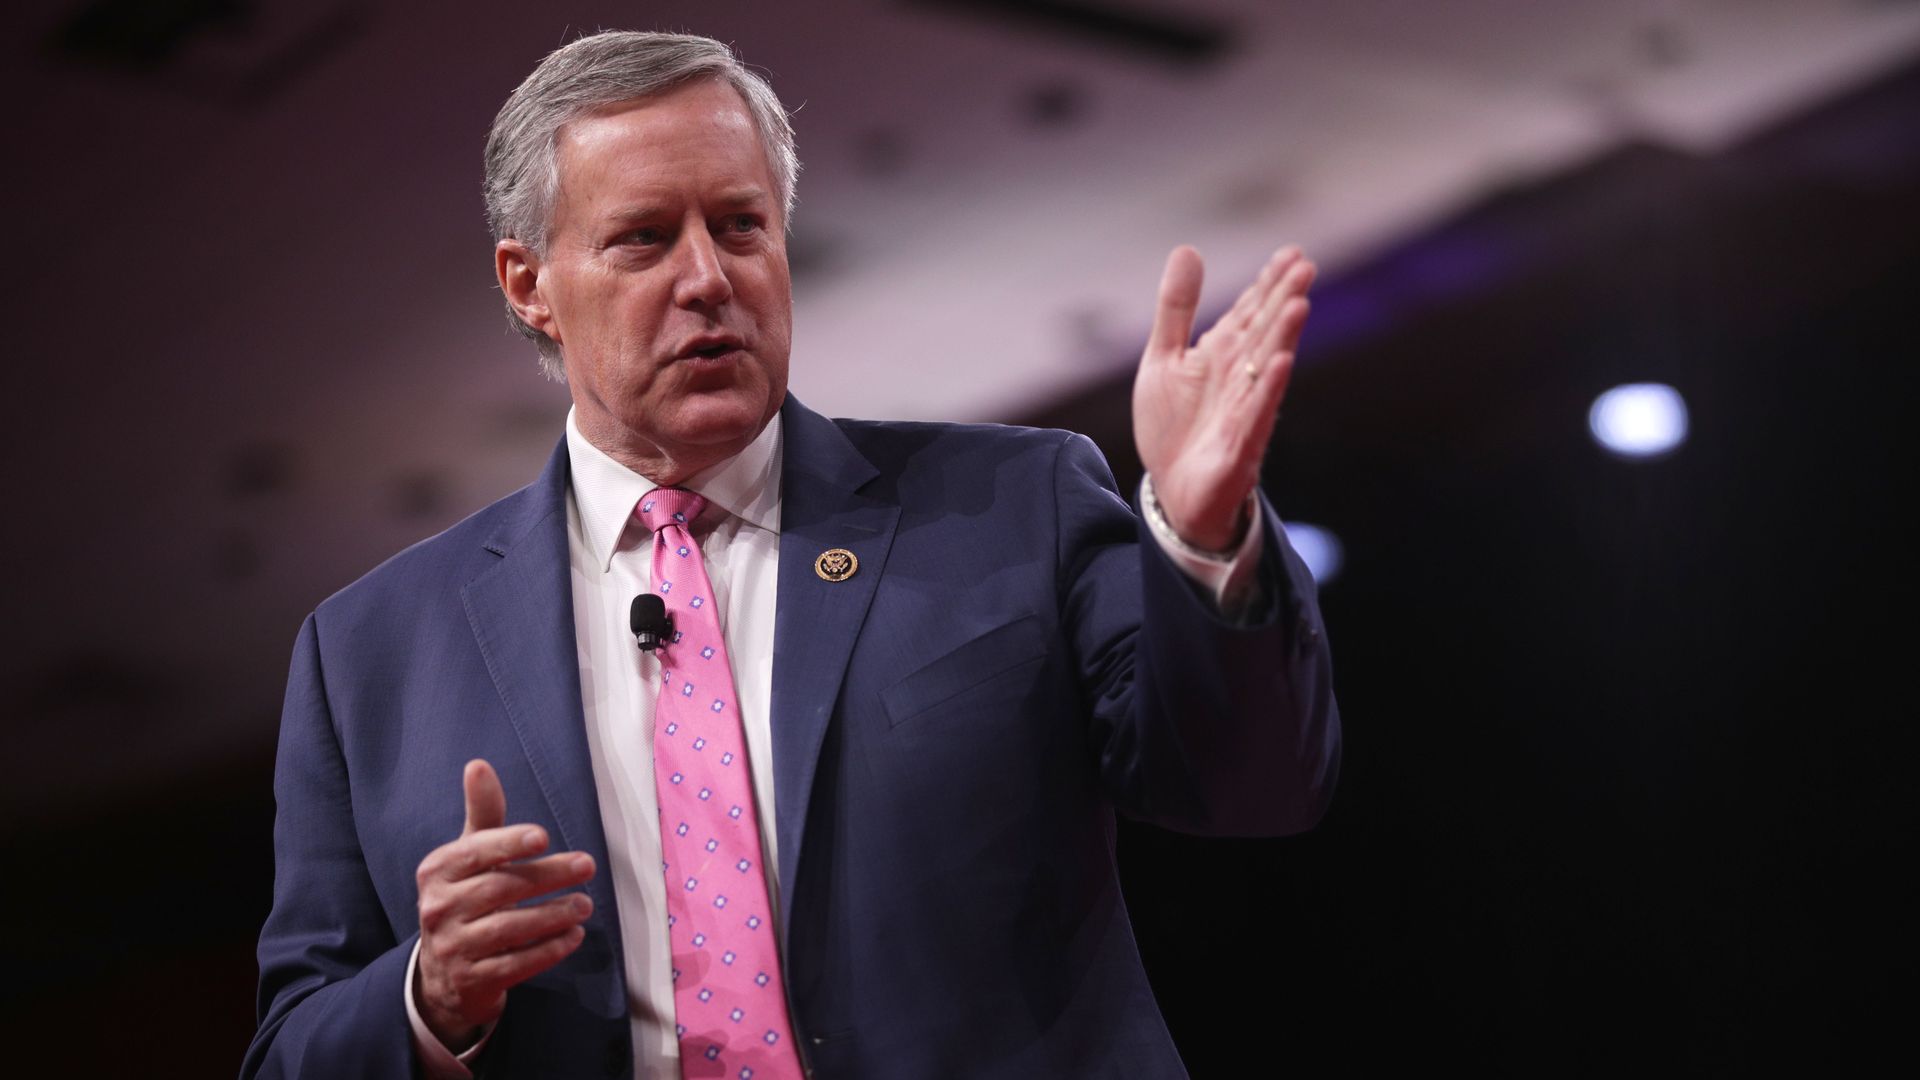 Rep. Mark Meadows speaks on stage at CPAC